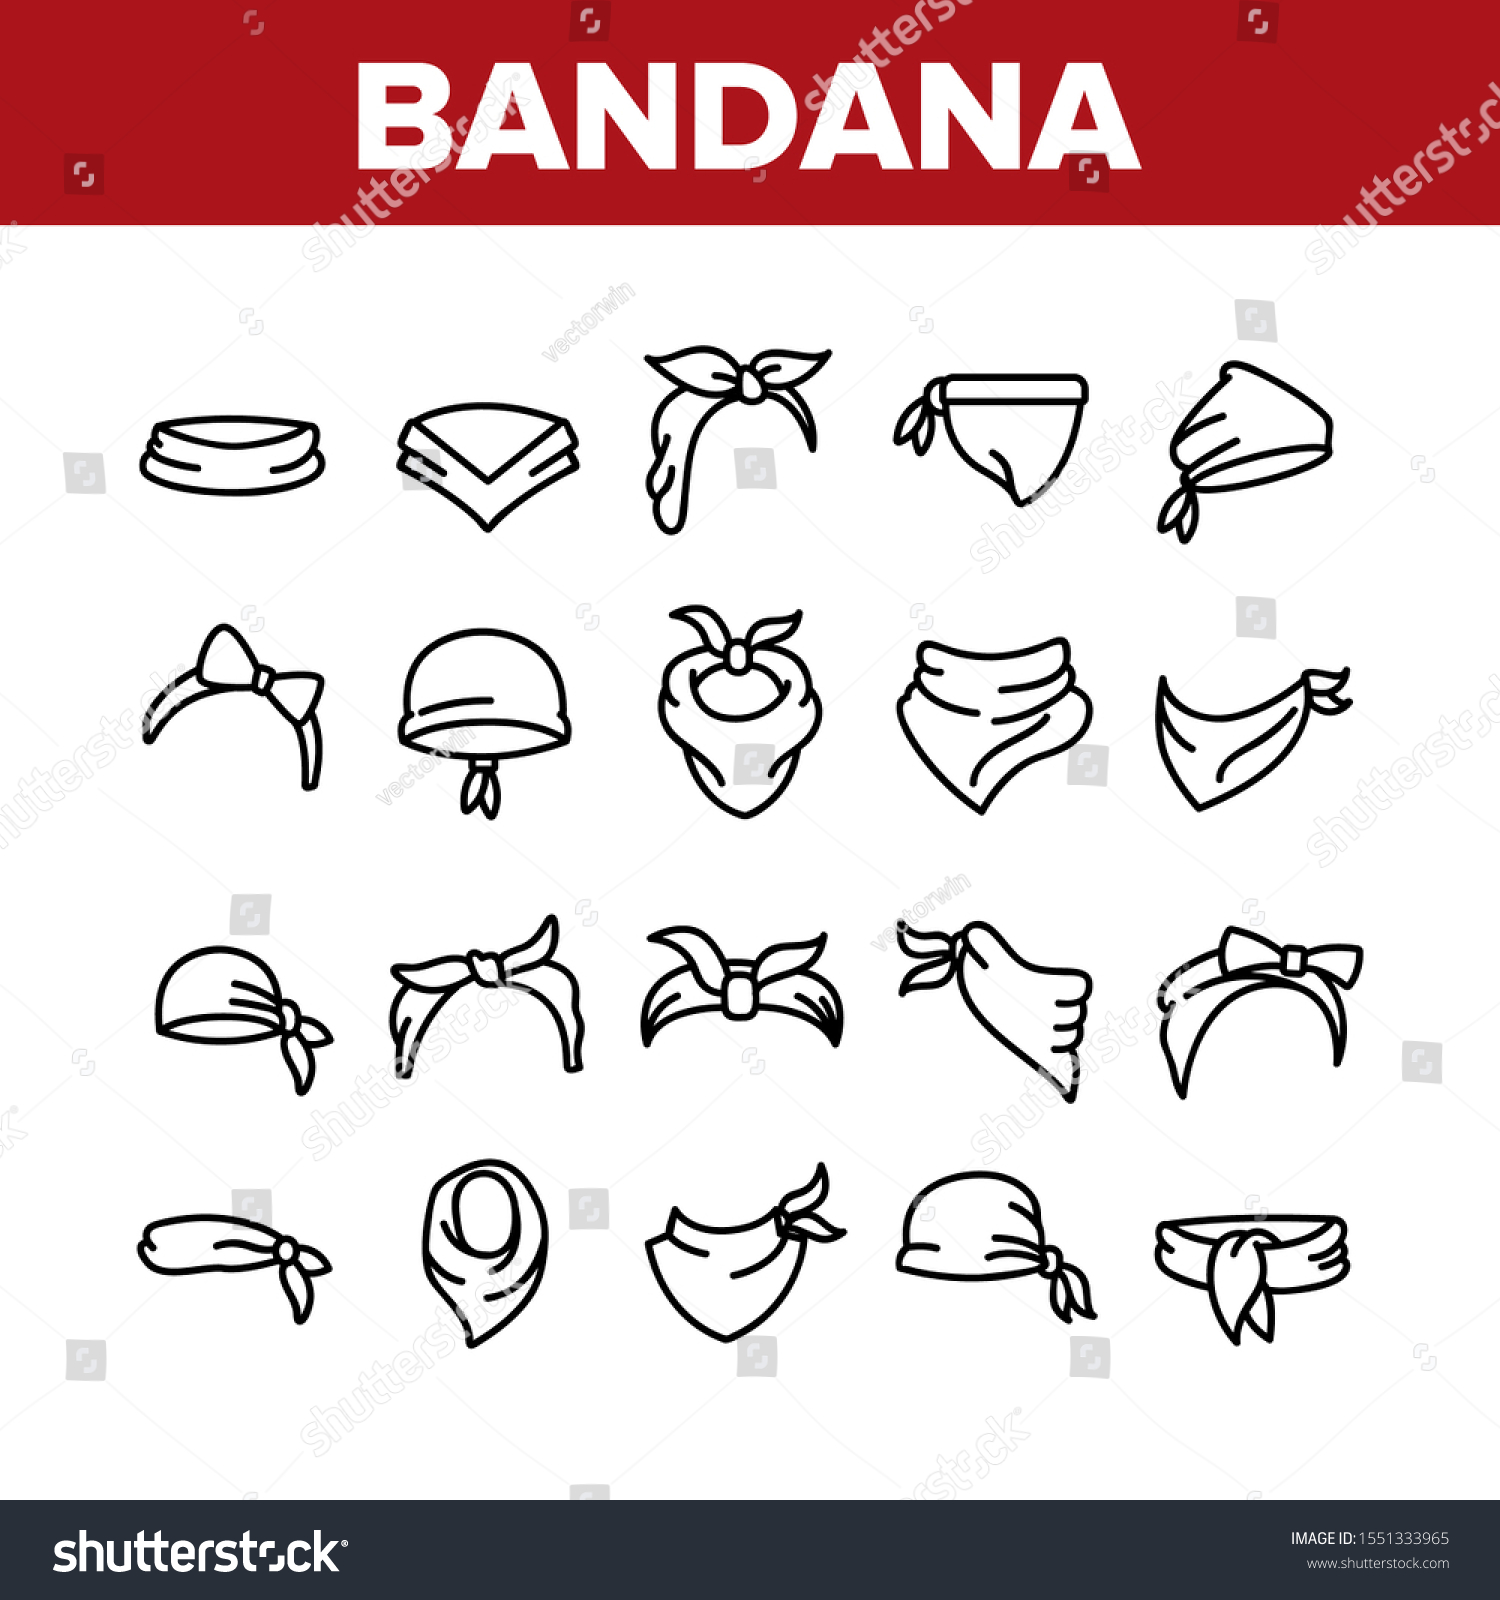 SVG of Bandana Hats Collection Elements Icons Set Vector Thin Line. Bandana Windy Hair Dressing, Headband For Woman Hairstyle, Cowboy Face Mask Concept Linear Pictograms. Monochrome Contour Illustrations svg